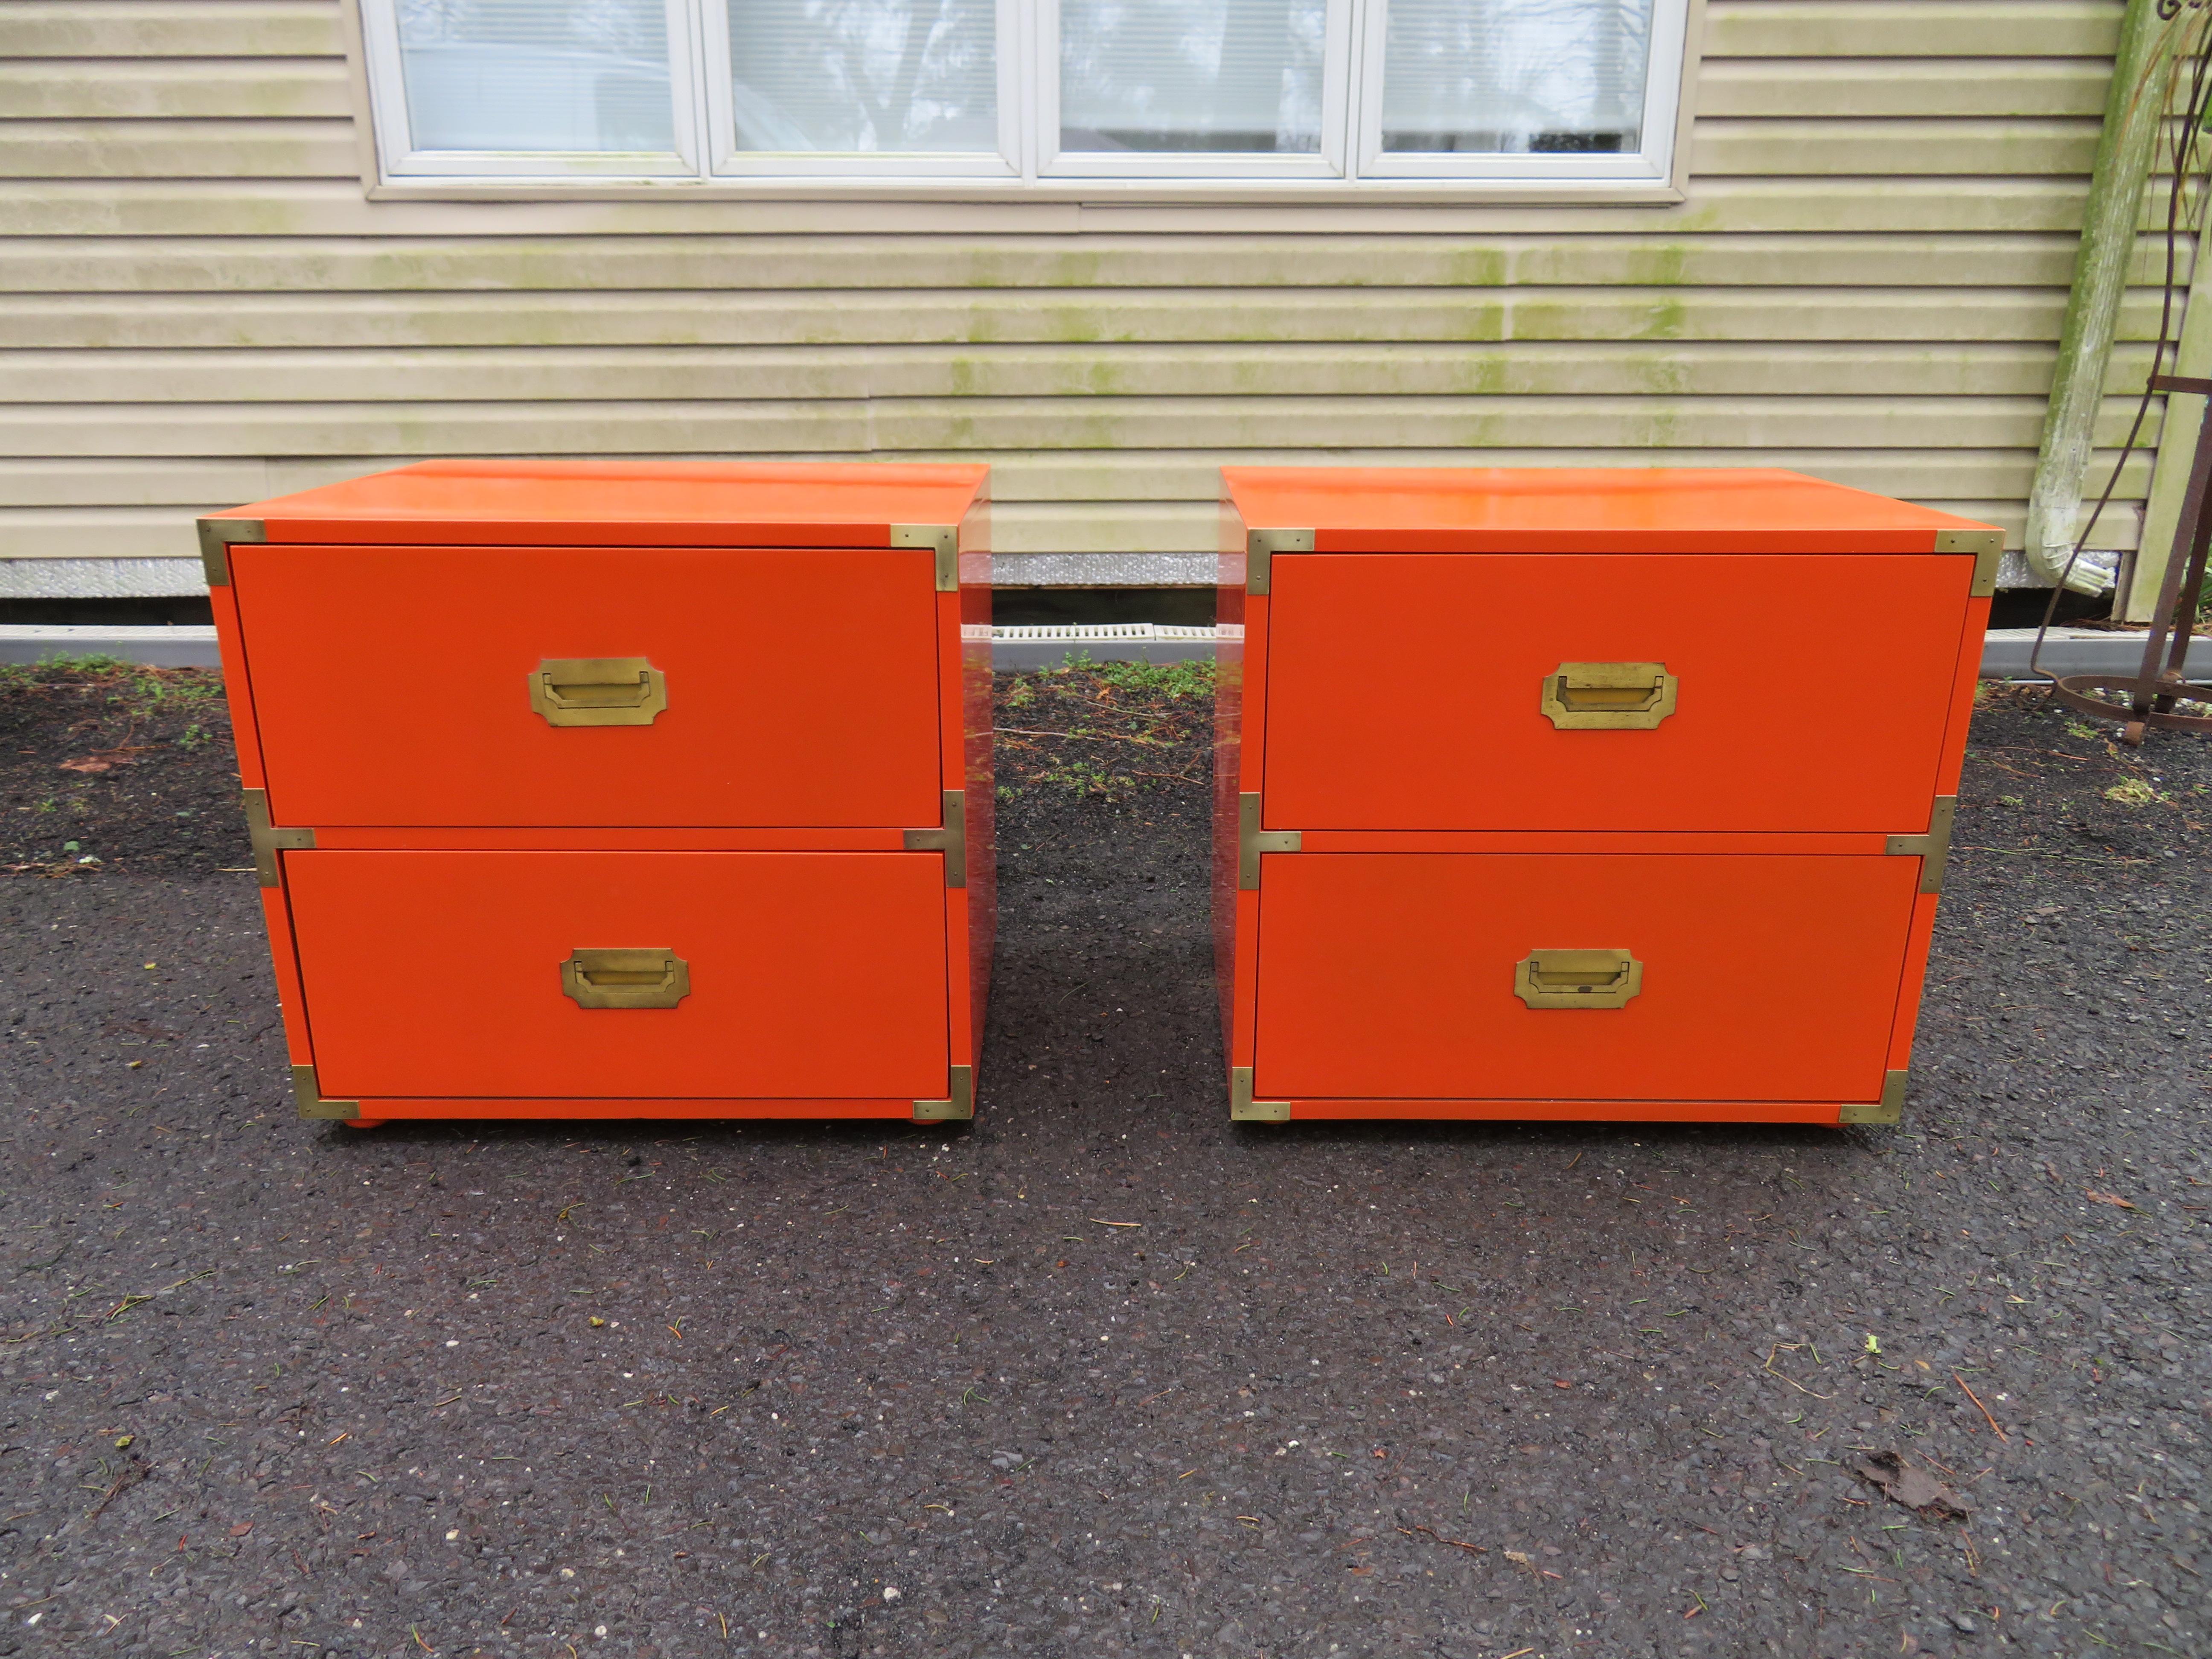 Gorgeous pair of Dixie Campaigner night stands with new high gloss Hermes orange lacquer. These are breathtaking in person and very well done. The original brass hardware has been polished but still retain that vintage feel-see photos.